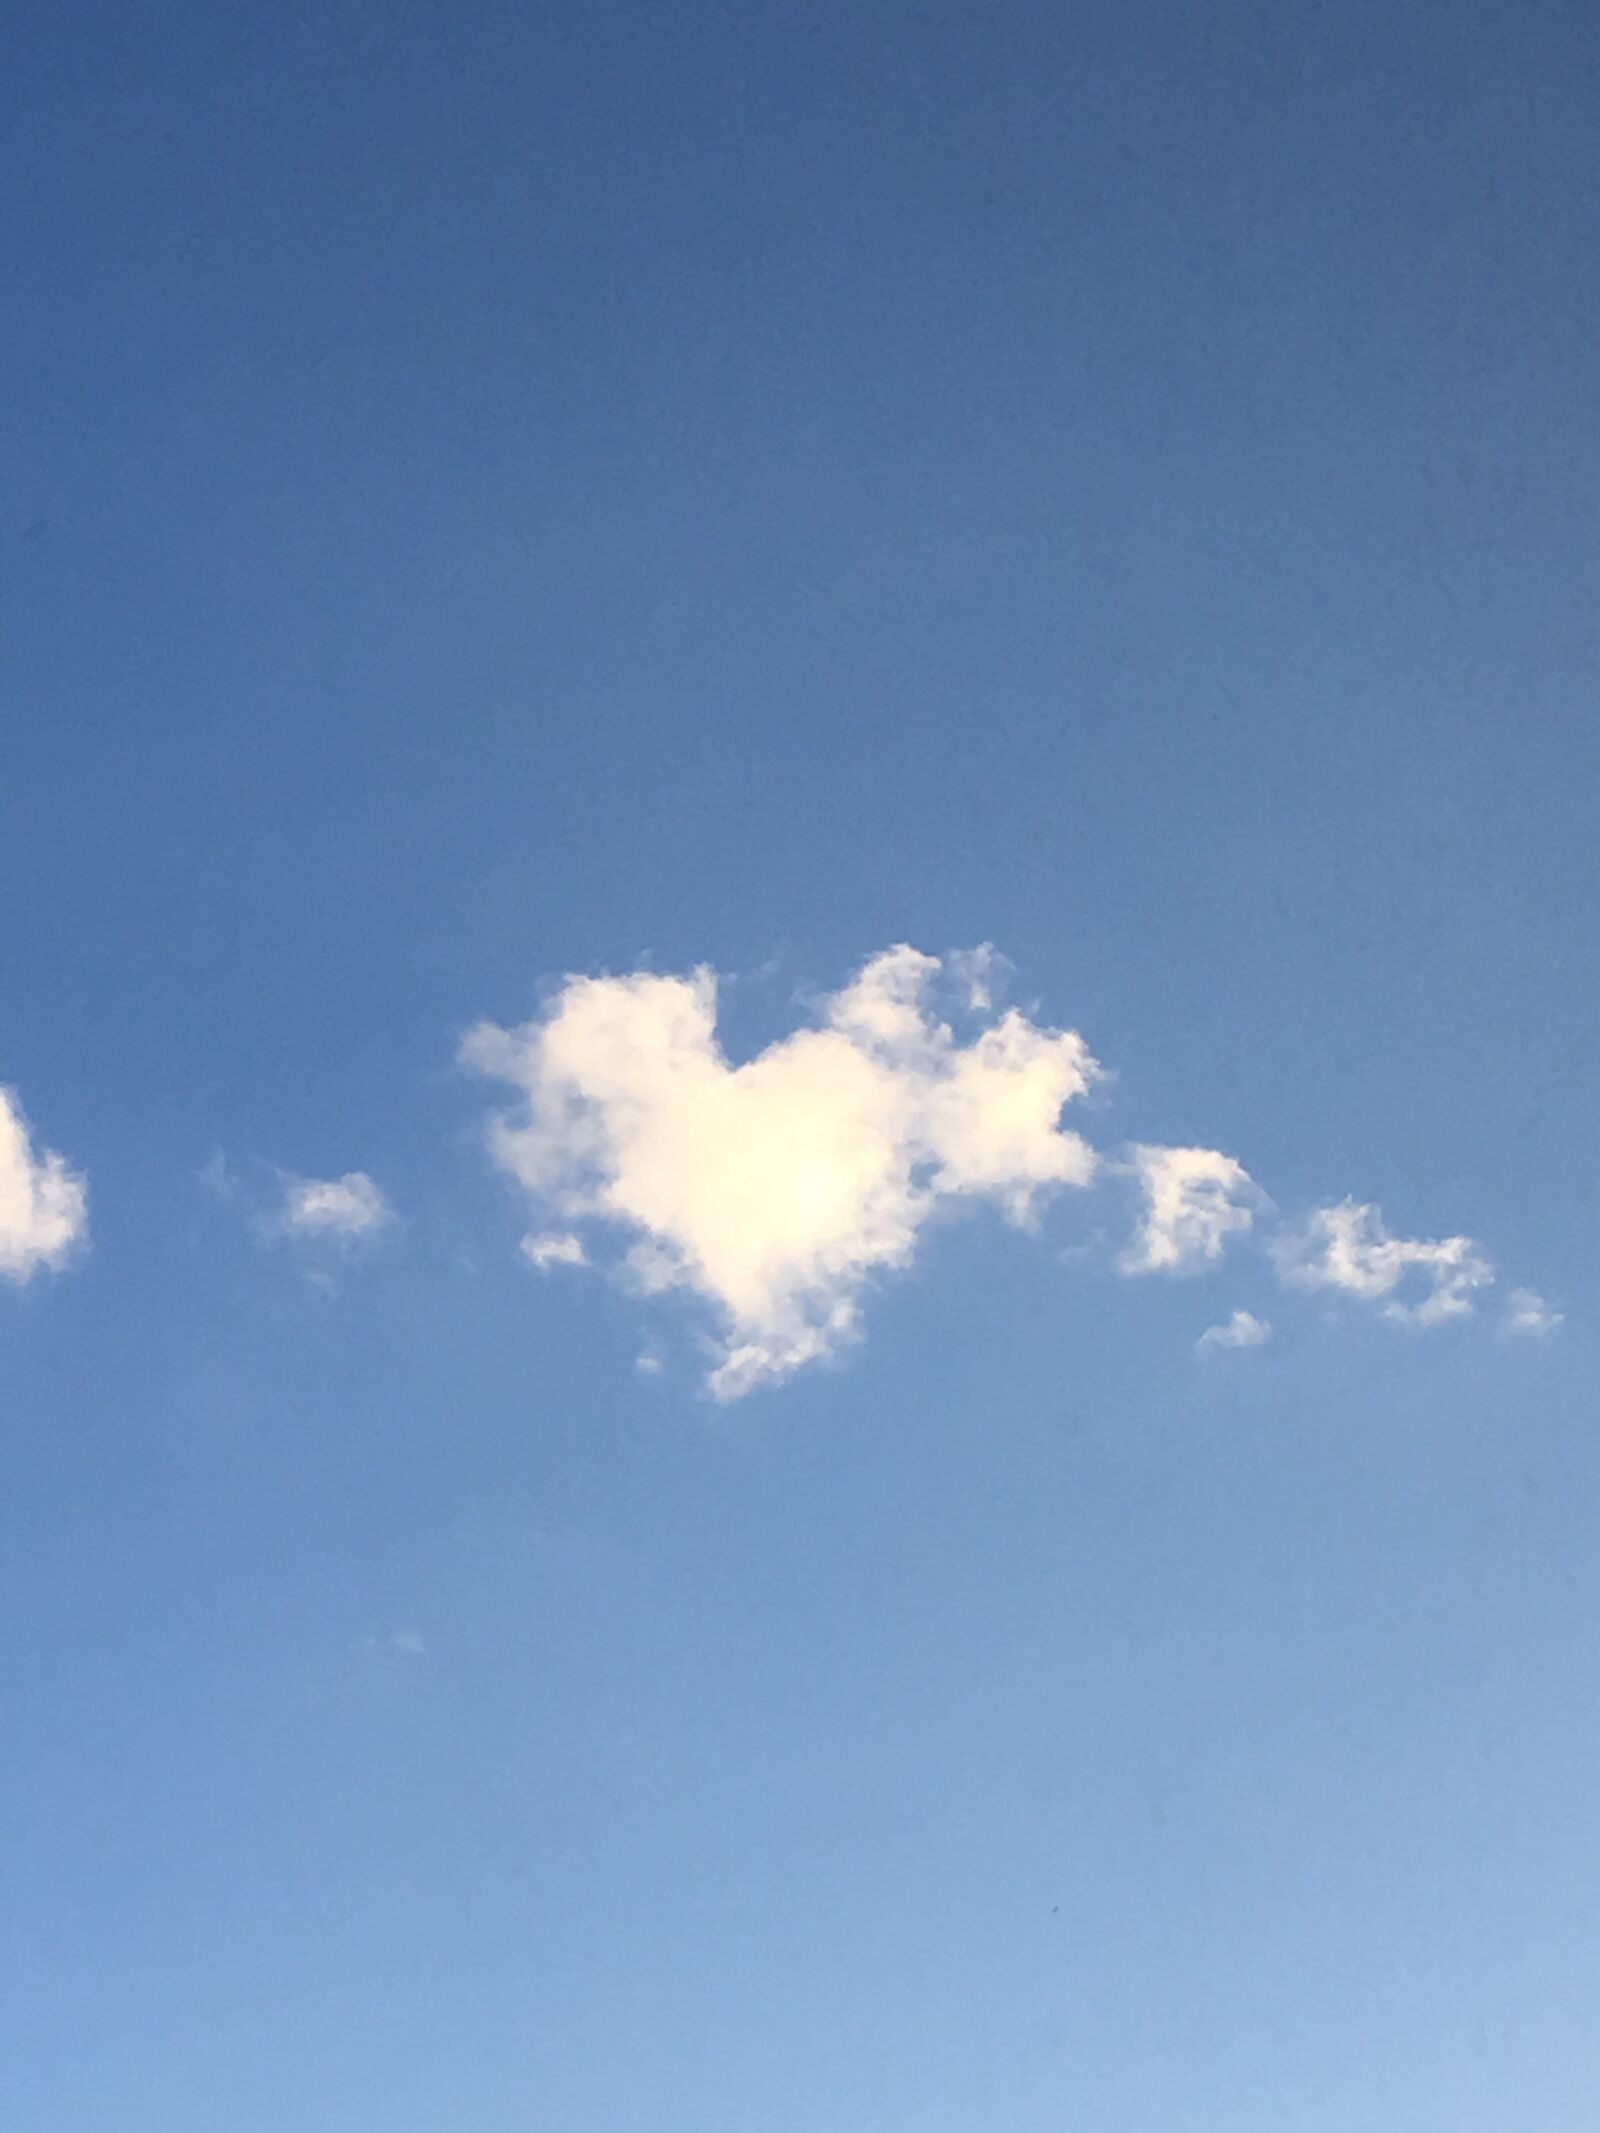 Apple iPhone 6s + iPhone 6s back camera 4.15mm f/2.2 sample photo. Sky, heart, blue photography